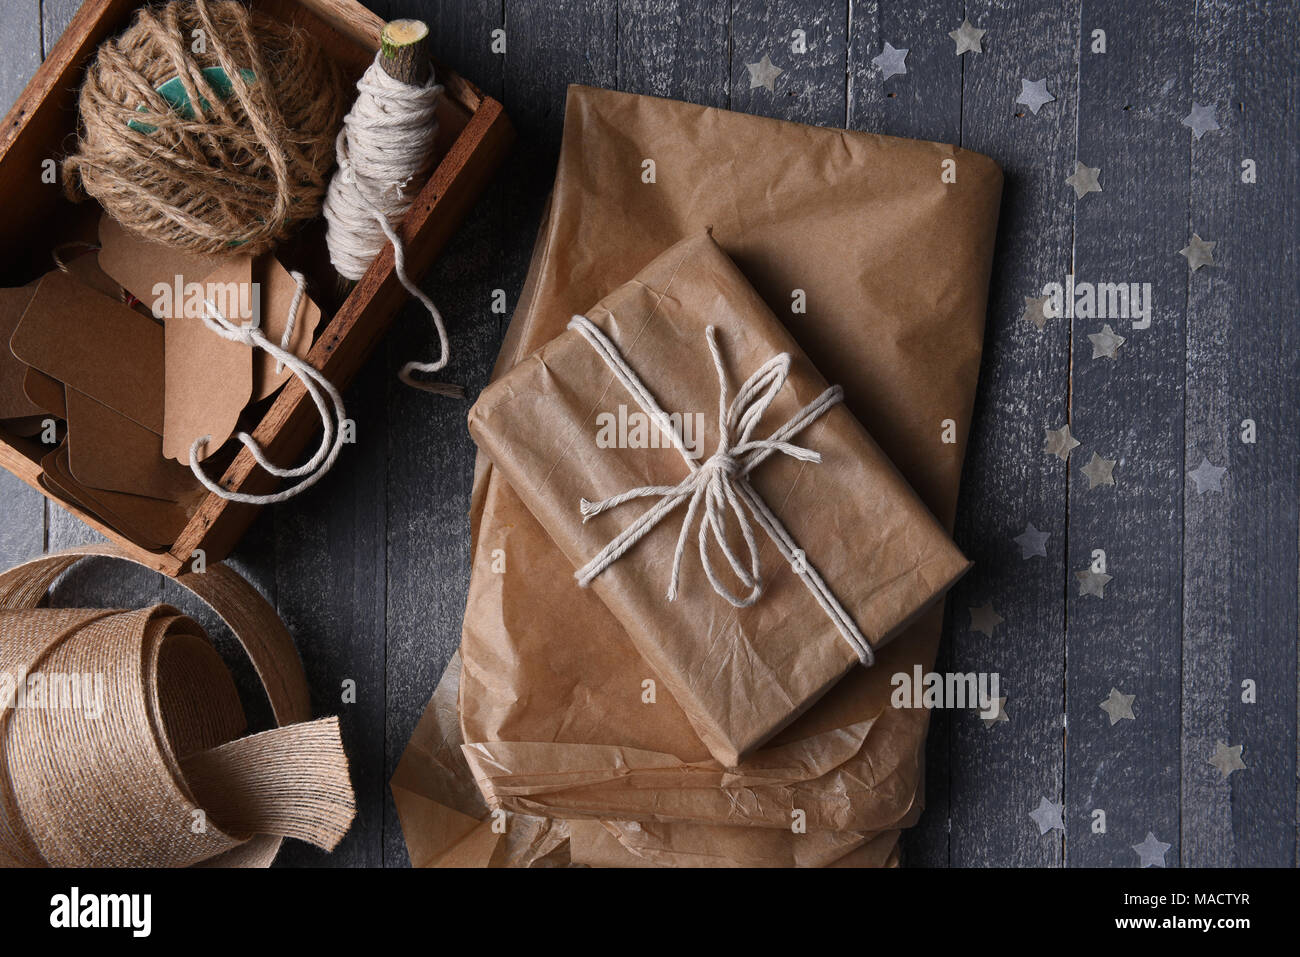 Roll of plain brown wrapping paper Stock Photo - Alamy